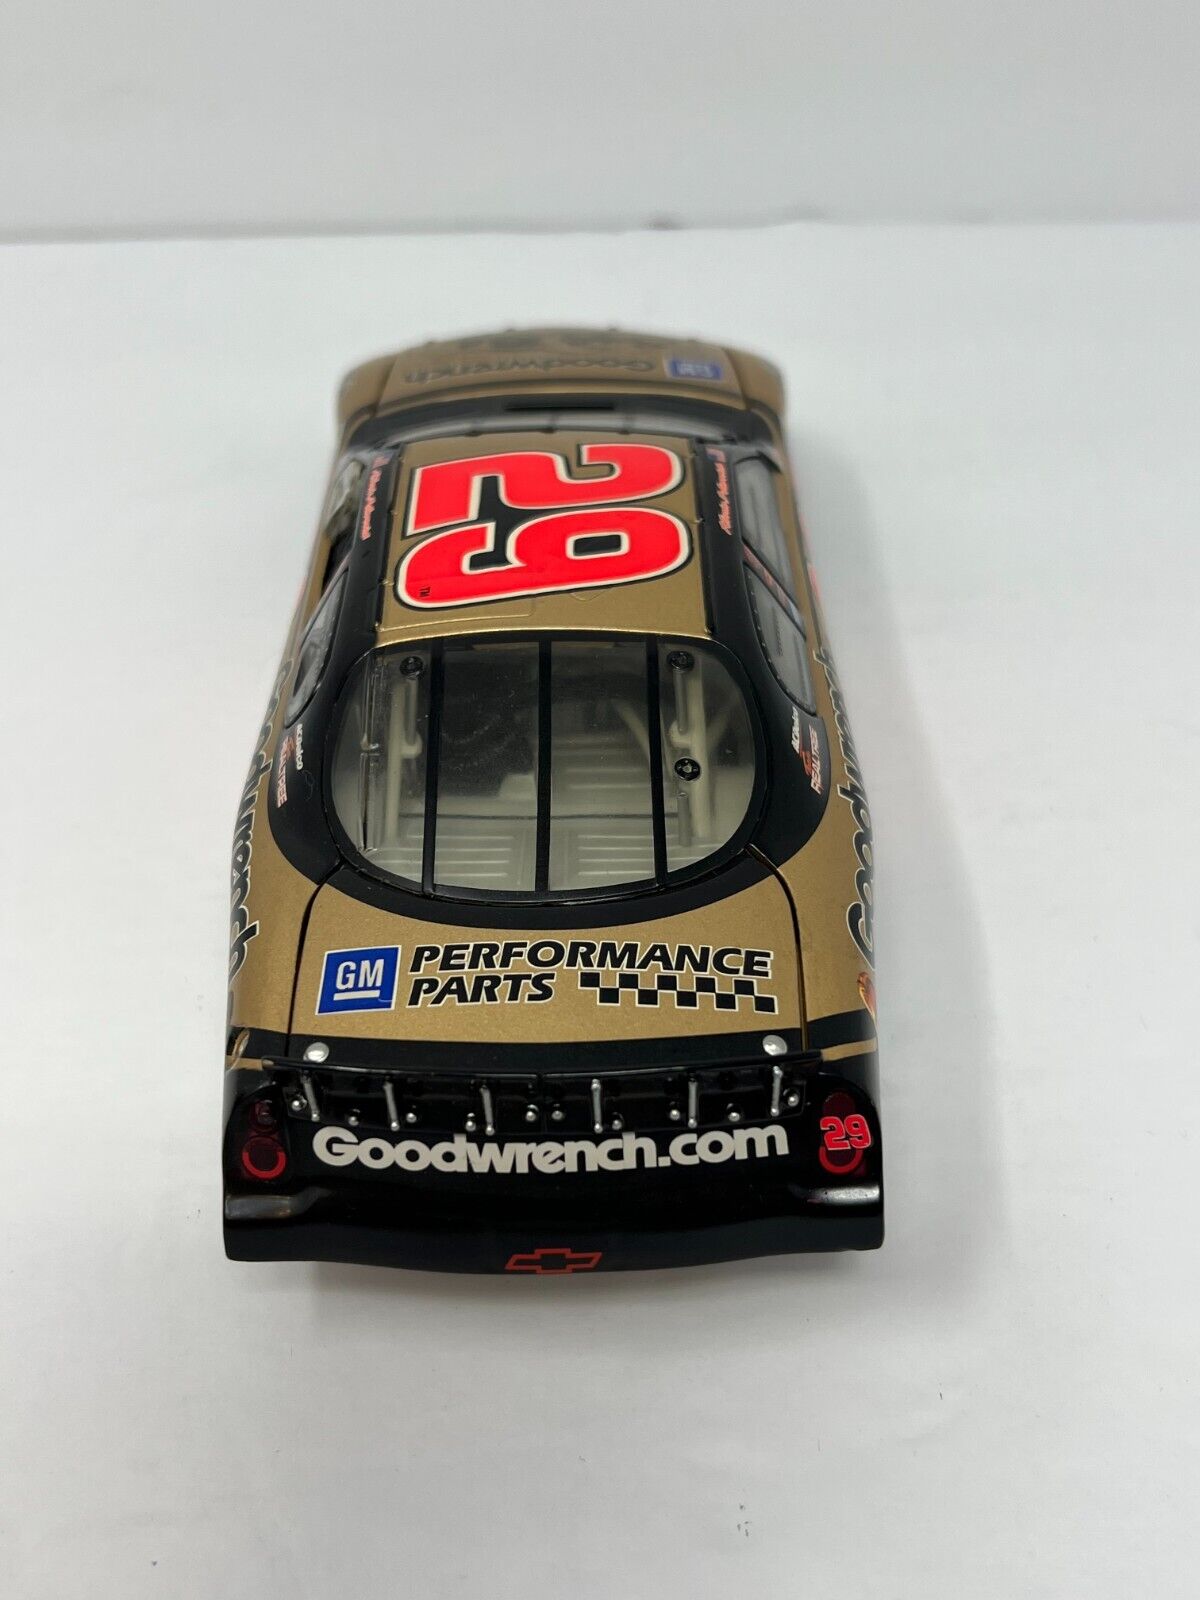 Action Nascar #29 Kevin Harvick GM Goodwrench Sugar Ray Monte Carlo 1:24 Diecast